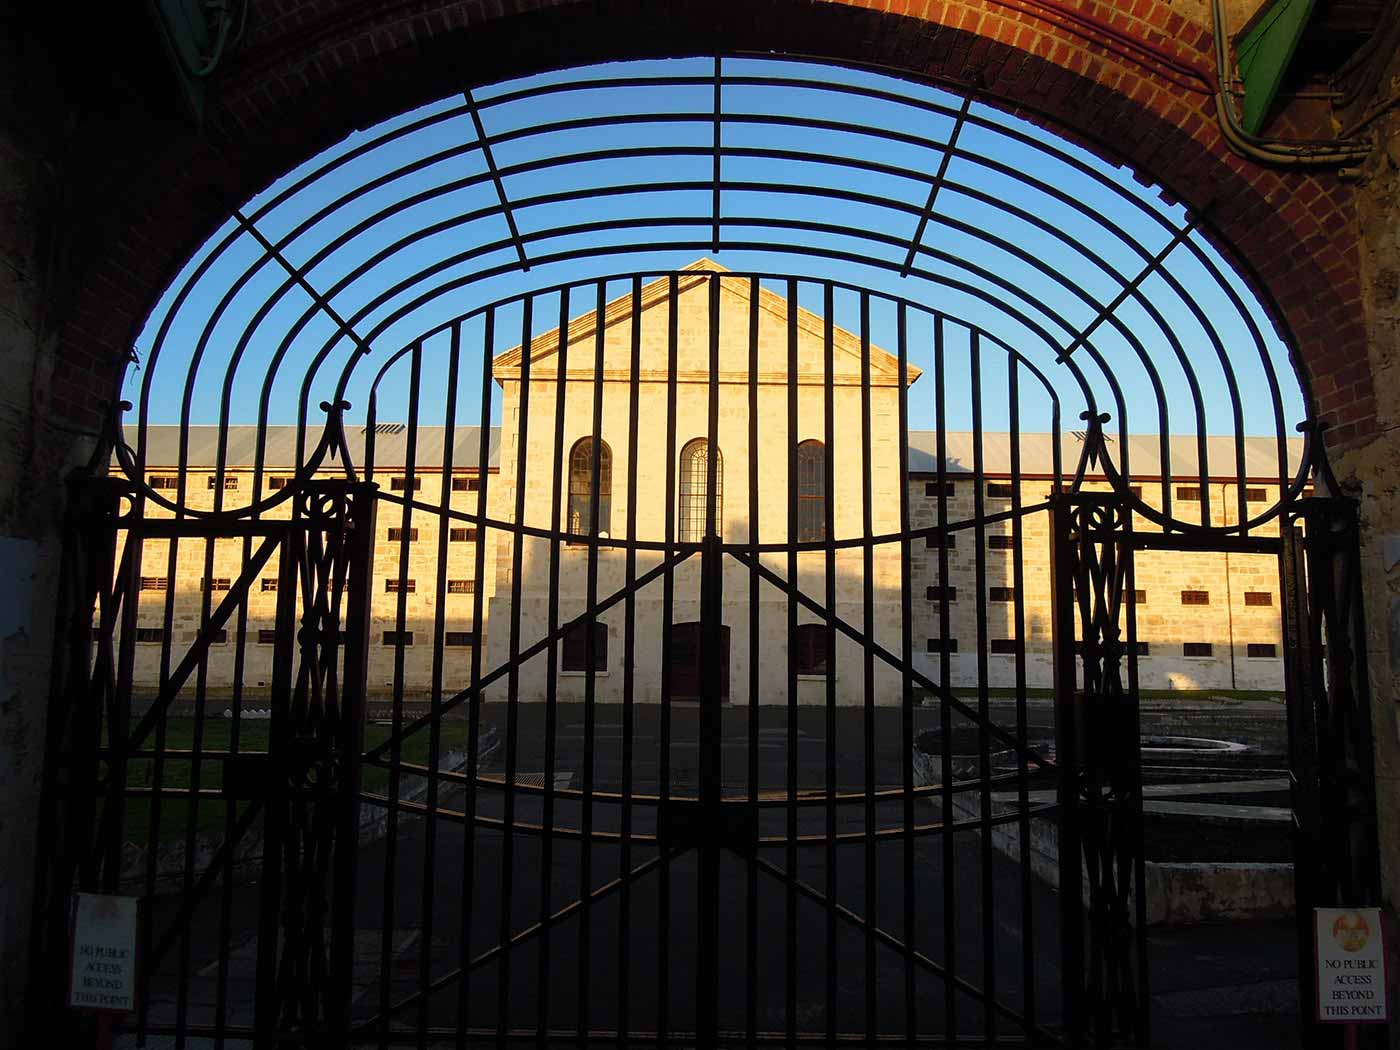 View of a heritage building through arc-shaped gates.